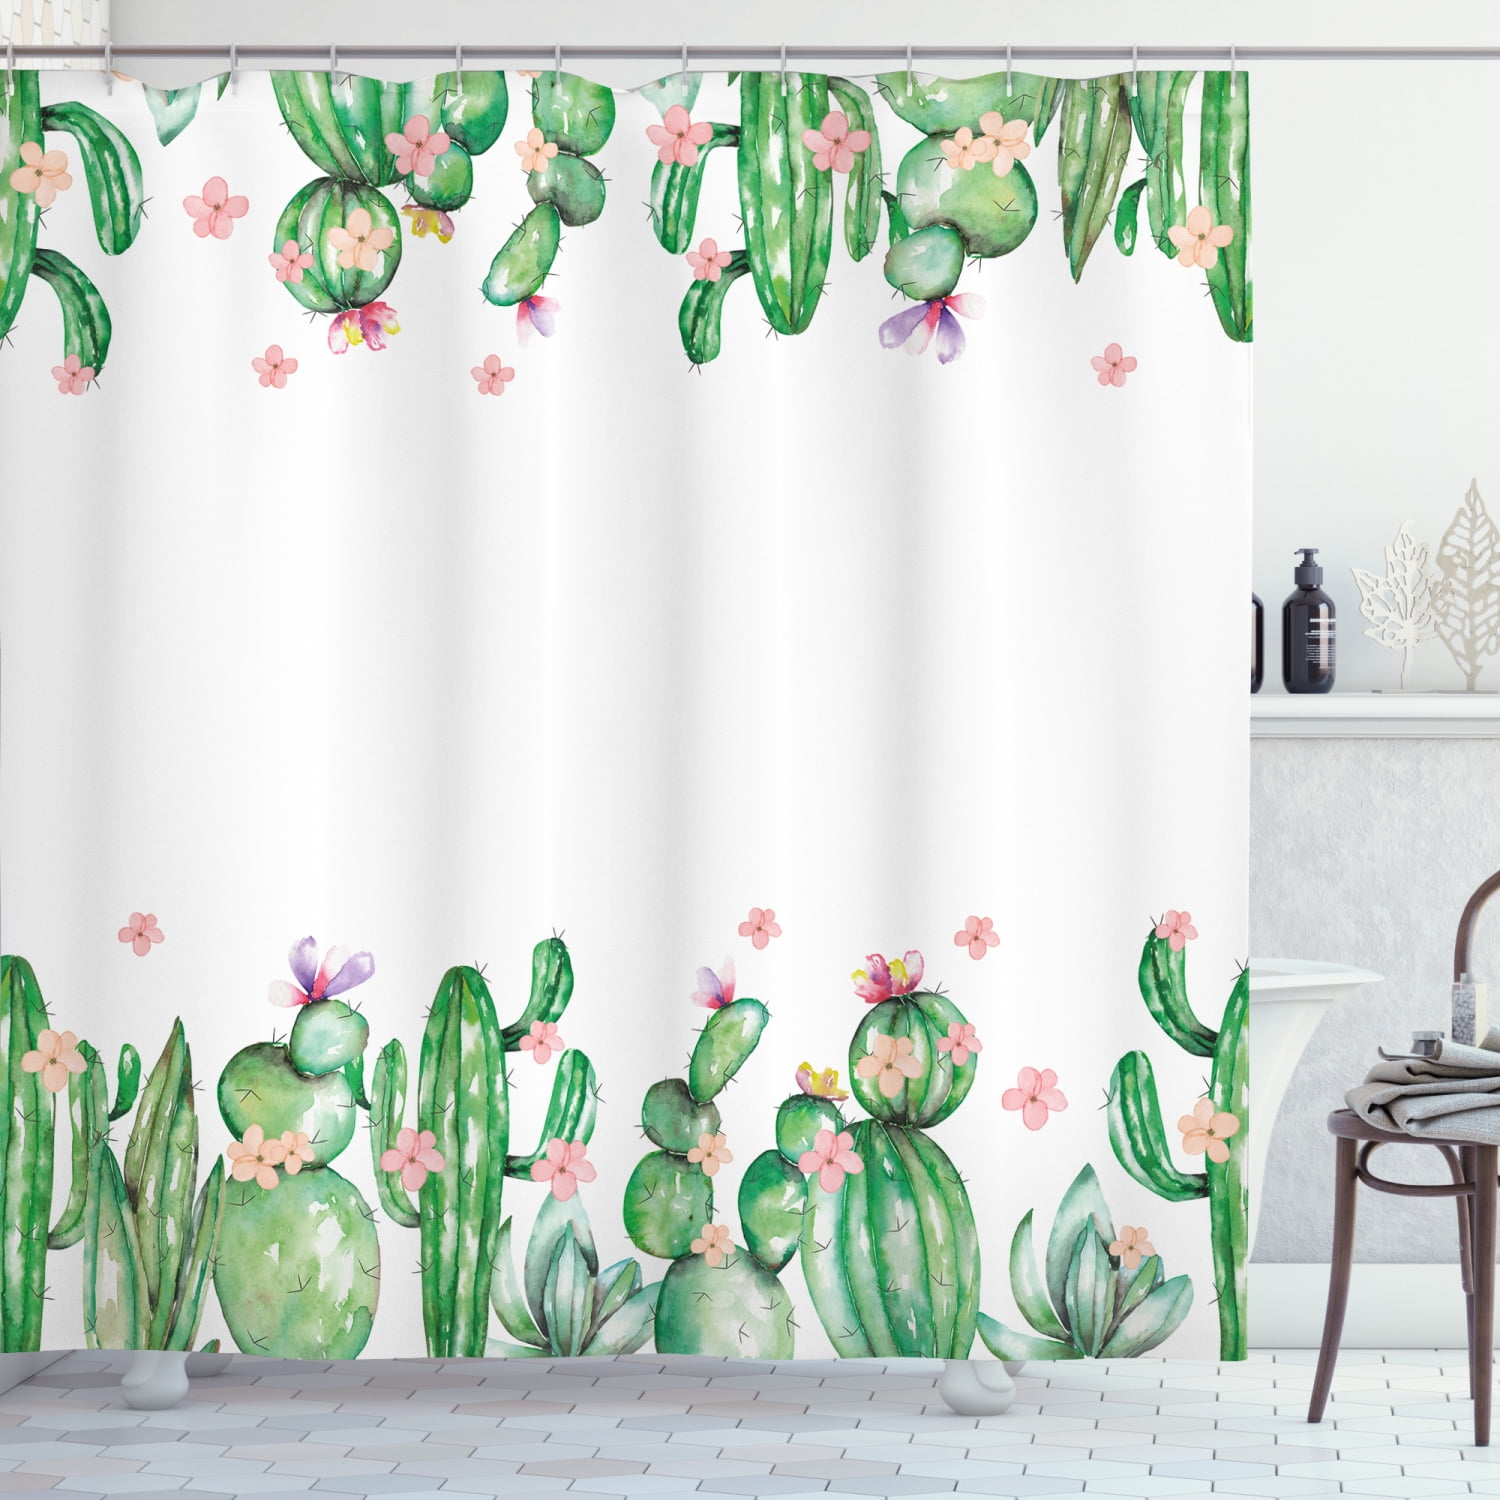 US Stock Exotic Watercolor Cactus Floral Bathroom Shower Curtain Set 60x72" Hot 